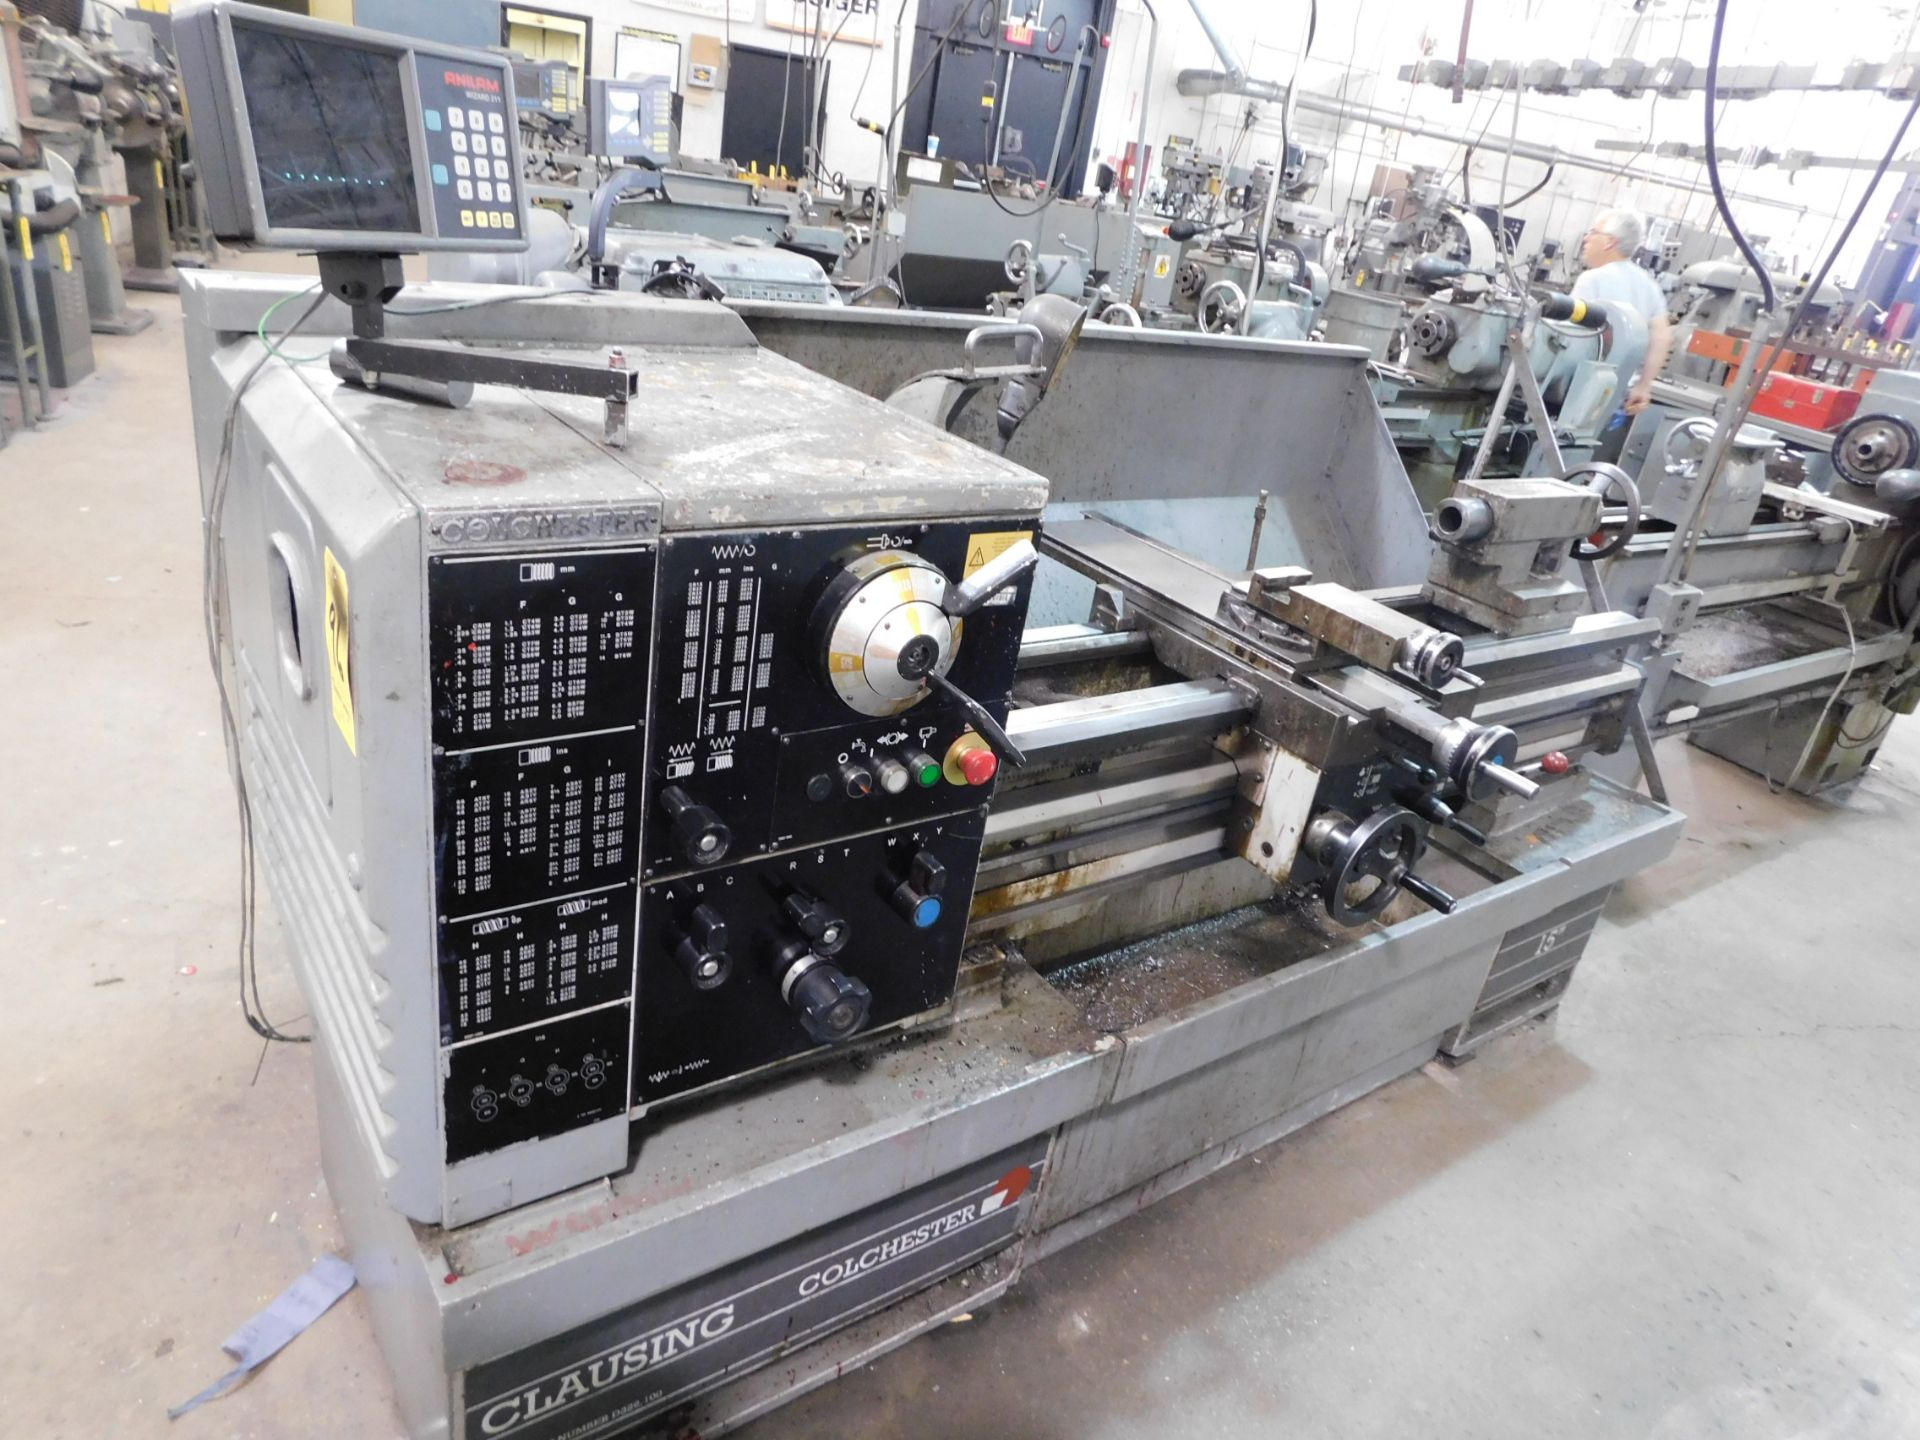 Clausing Colchester 15" x 50" Toolroom Lathe, SN TG0562-490, with Anilam Wizard 211 2-Axis Digital